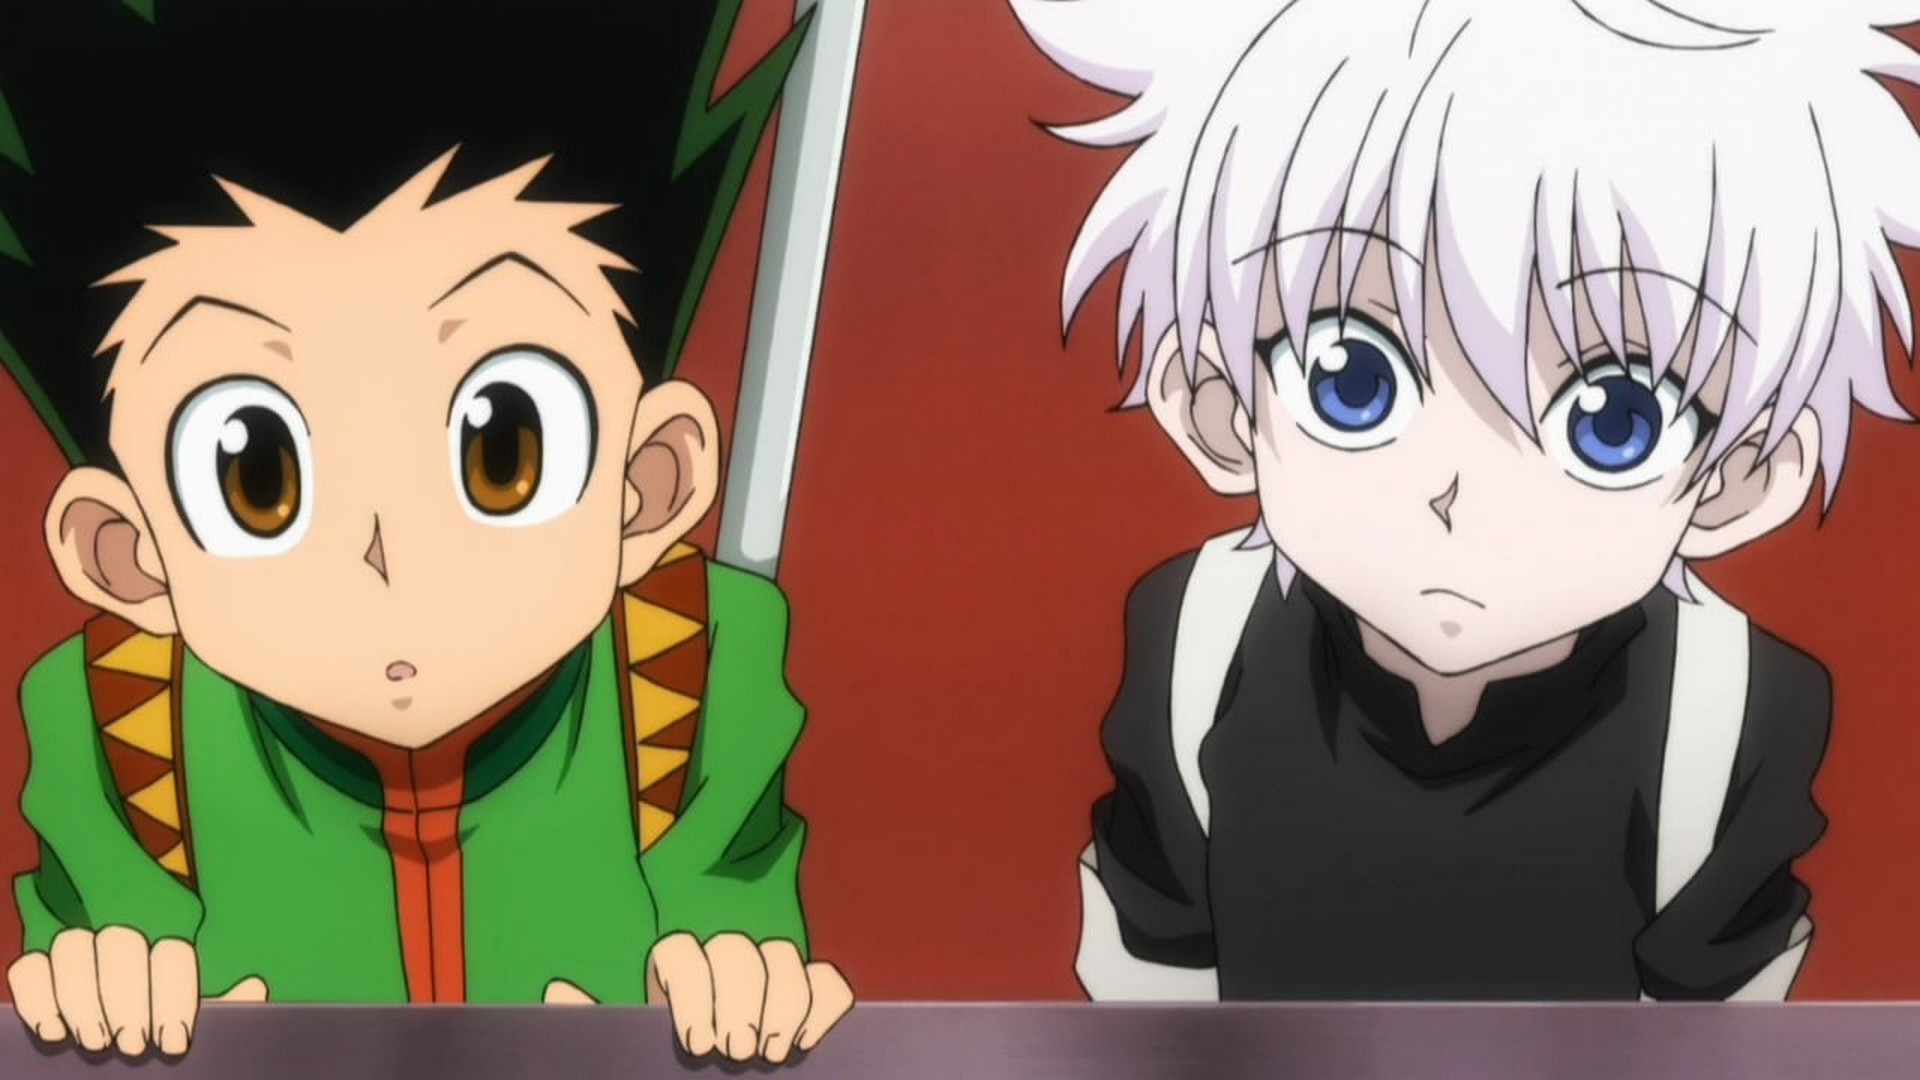 Gon And Killua Desktop Wallpaper with high-resolution 1920x1080 pixel. You can use this wallpaper for your Windows and Mac OS computers as well as your Android and iPhone smartphones